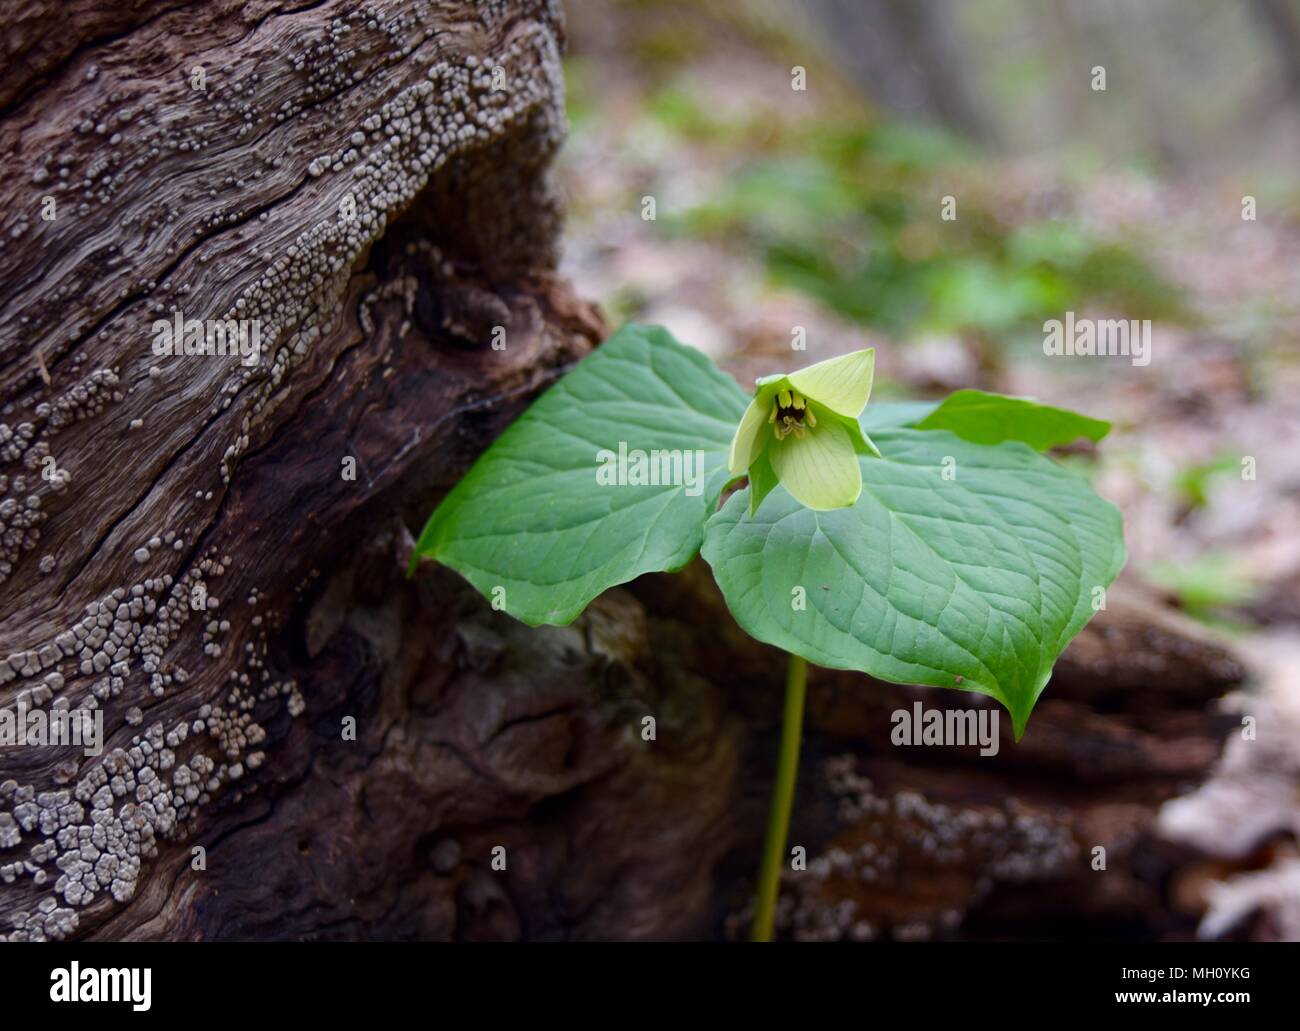 Unusual pale yellow flower on a red trillium plant emerging near a log in a spring forest. Stock Photo